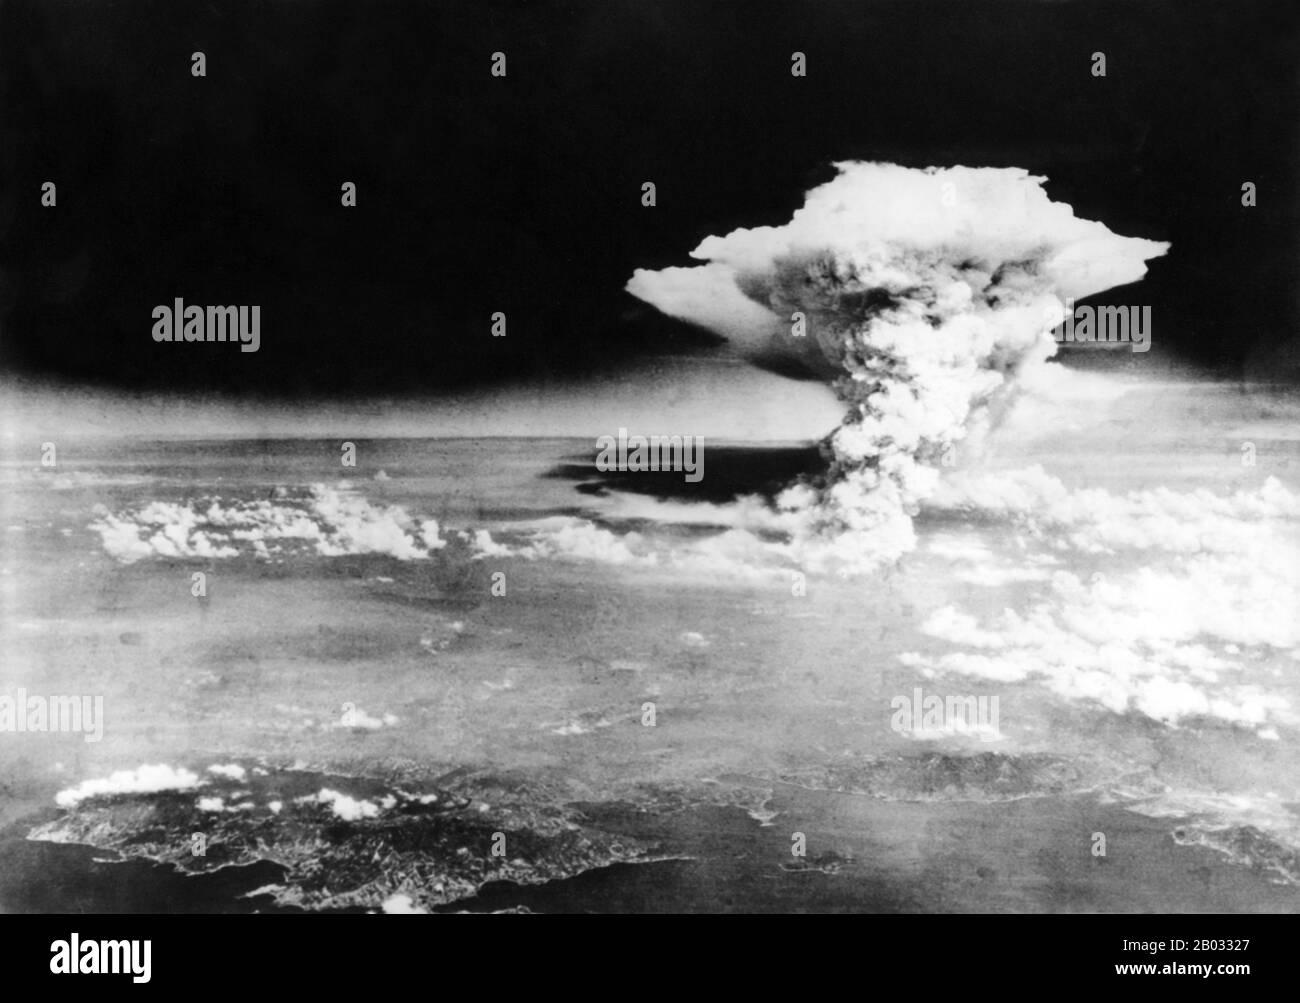 The United States, with the consent of the United Kingdom as laid down in the Quebec Agreement, dropped nuclear weapons on the Japanese cities of Hiroshima and Nagasaki in August 1945, during the final stage of World War II.  The two bombings, which killed at least 129,000 people, remain the only use of nuclear weapons for warfare in history. Stock Photo